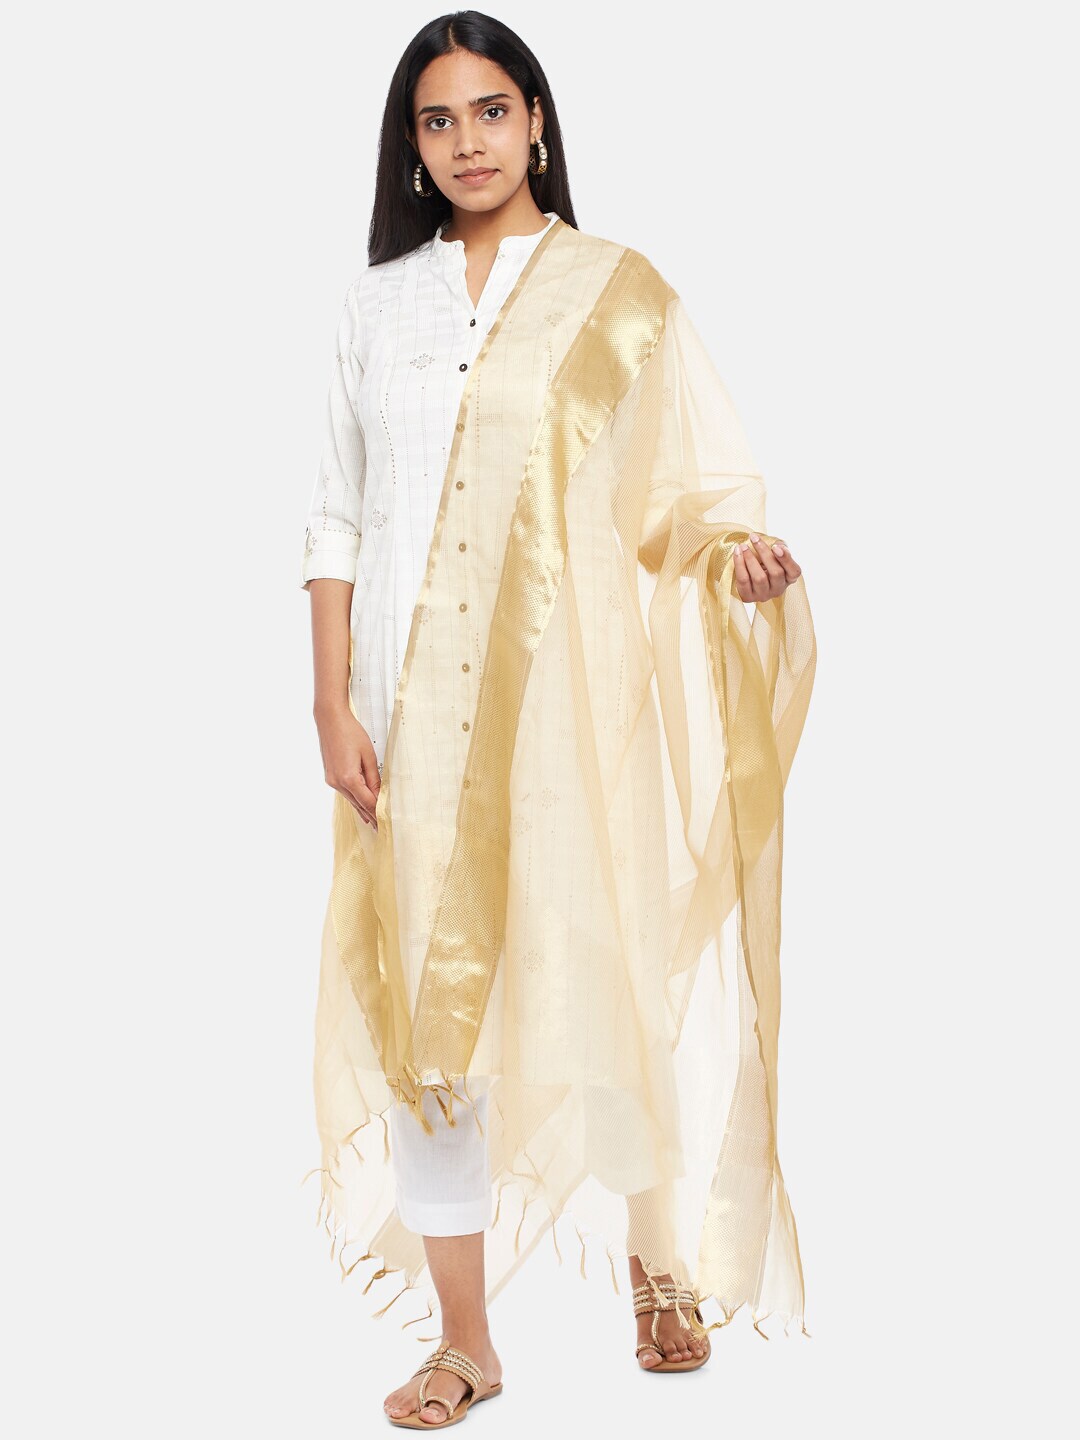 RANGMANCH BY PANTALOONS Gold-Toned Dupatta Price in India